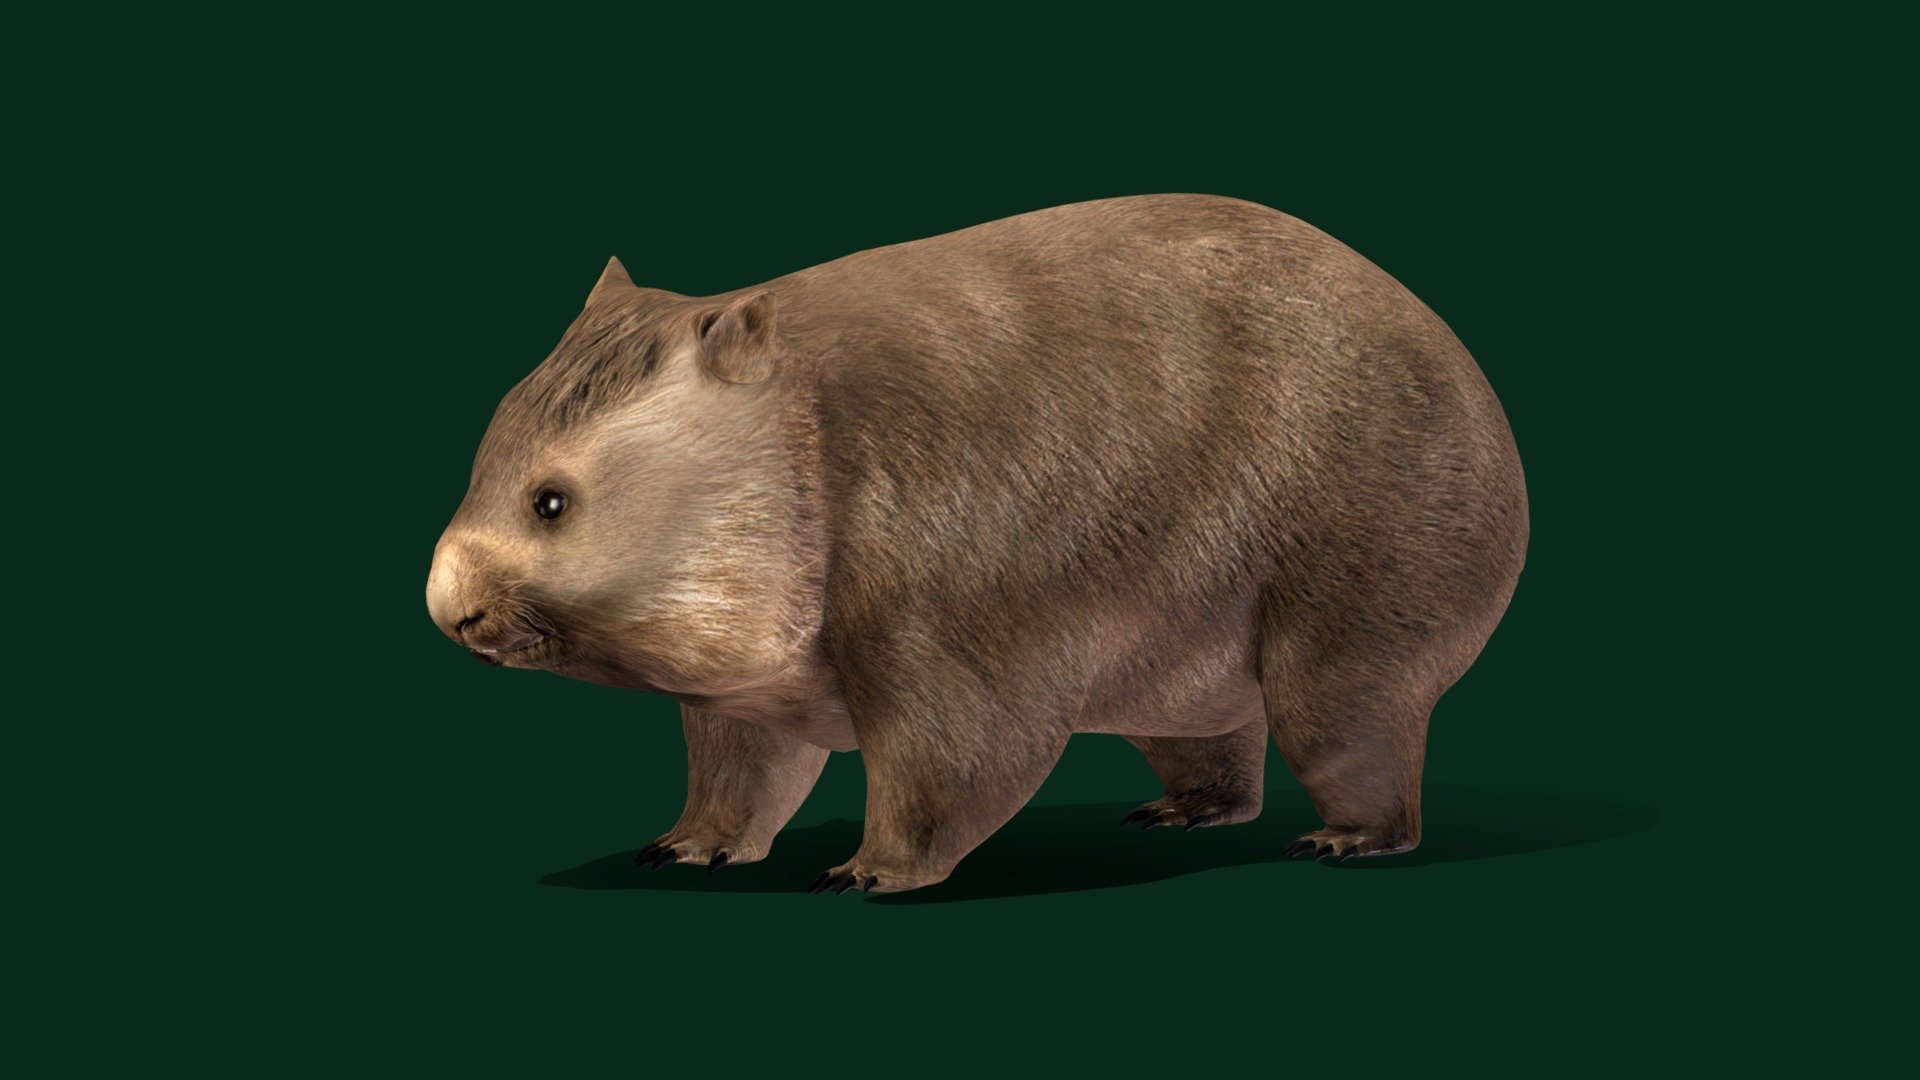 Wombats  (Joey) 

Vombatidae Short-legged Muscular quadrupedal marsupials Animal ( Mammal )

1 Draw Calls

GameReady 

11 Animations

4K PBR Textures Material

Unreal FBX

Unity FBX  

Blend File 

USDZ File (AR Ready). Real Scale Dimension

Textures Files

GLB File

Gltf File ( Spark AR, Lens Studio(SnapChat) , Effector(Tiktok) , Spline, Play Canvas ) Compatible

Triangles : 33220

Vertices  : 16697

Faces     : 33220

Edges     : 49868

Diffuse , Metallic, Roughness , Normal Map ,Specular Map,AO

Wombats are short-legged, muscular quadrupedal marsupials of the family Vombatidae that are native to Australia. Living species are about 1 m in length with small, stubby tails and weigh between 20 and 35 kg. Wikipedia
Mass: 20 – 35 kg
Speed: 40 km/h (Maximum, When threatened)
Term for young: joey Wikimedia Foundation
Class: Mammalia
Domain: Eukaryota
Family: Vombatidae; Burnett, 1830 - Wombat Joey Animal (Game Ready) - 3D model by Nyilonelycompany 3d model